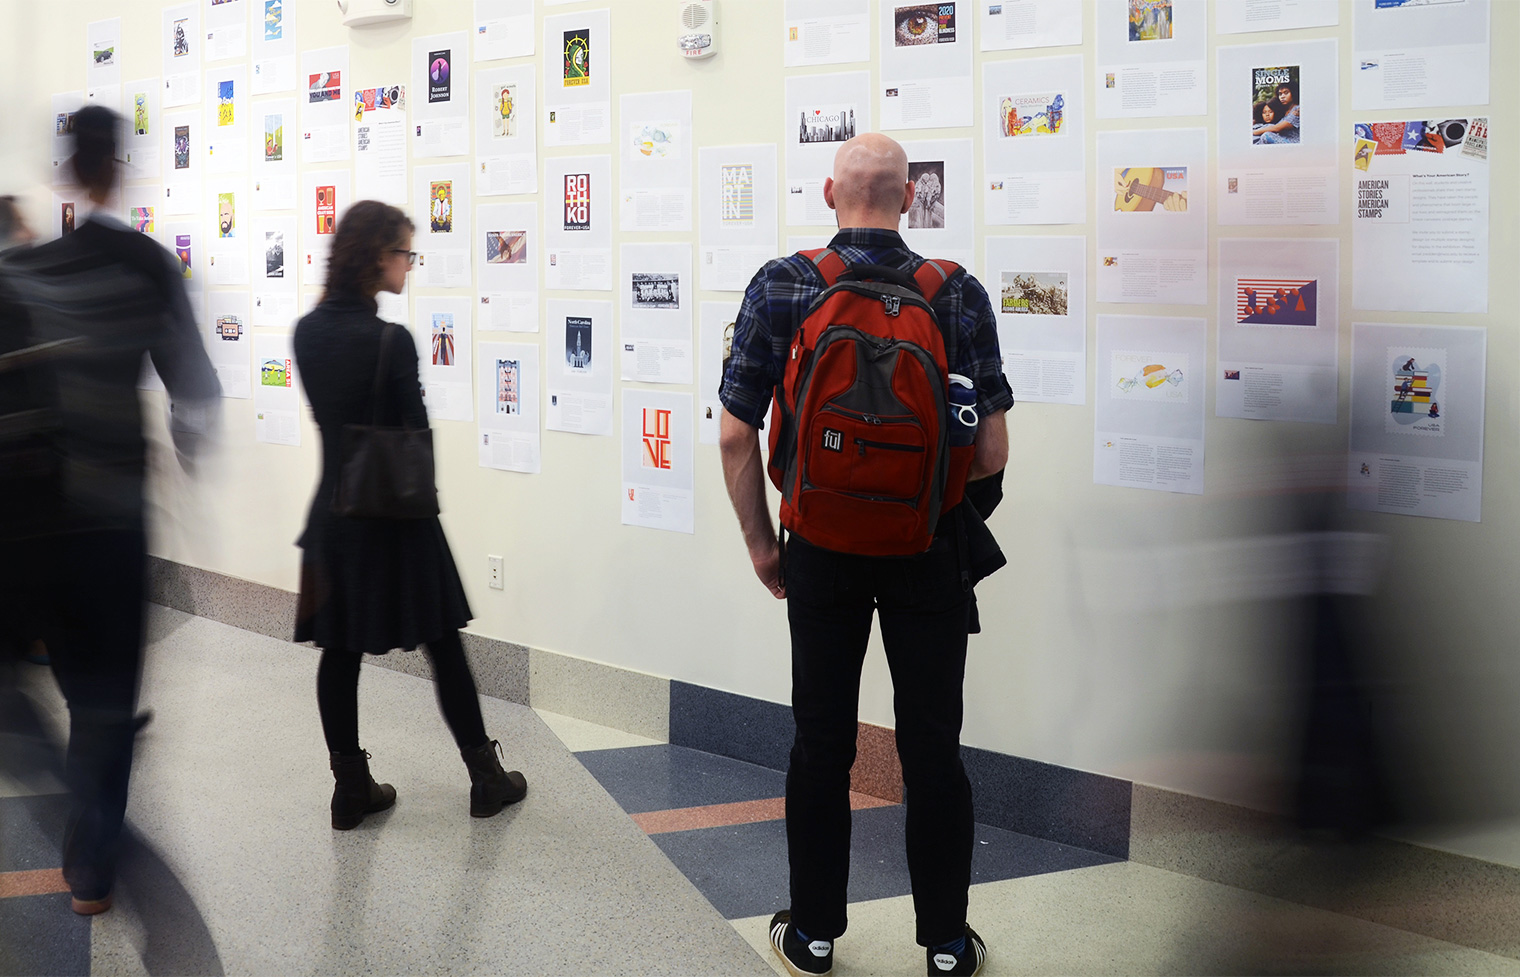 Visitors viewing the student stamp designs.